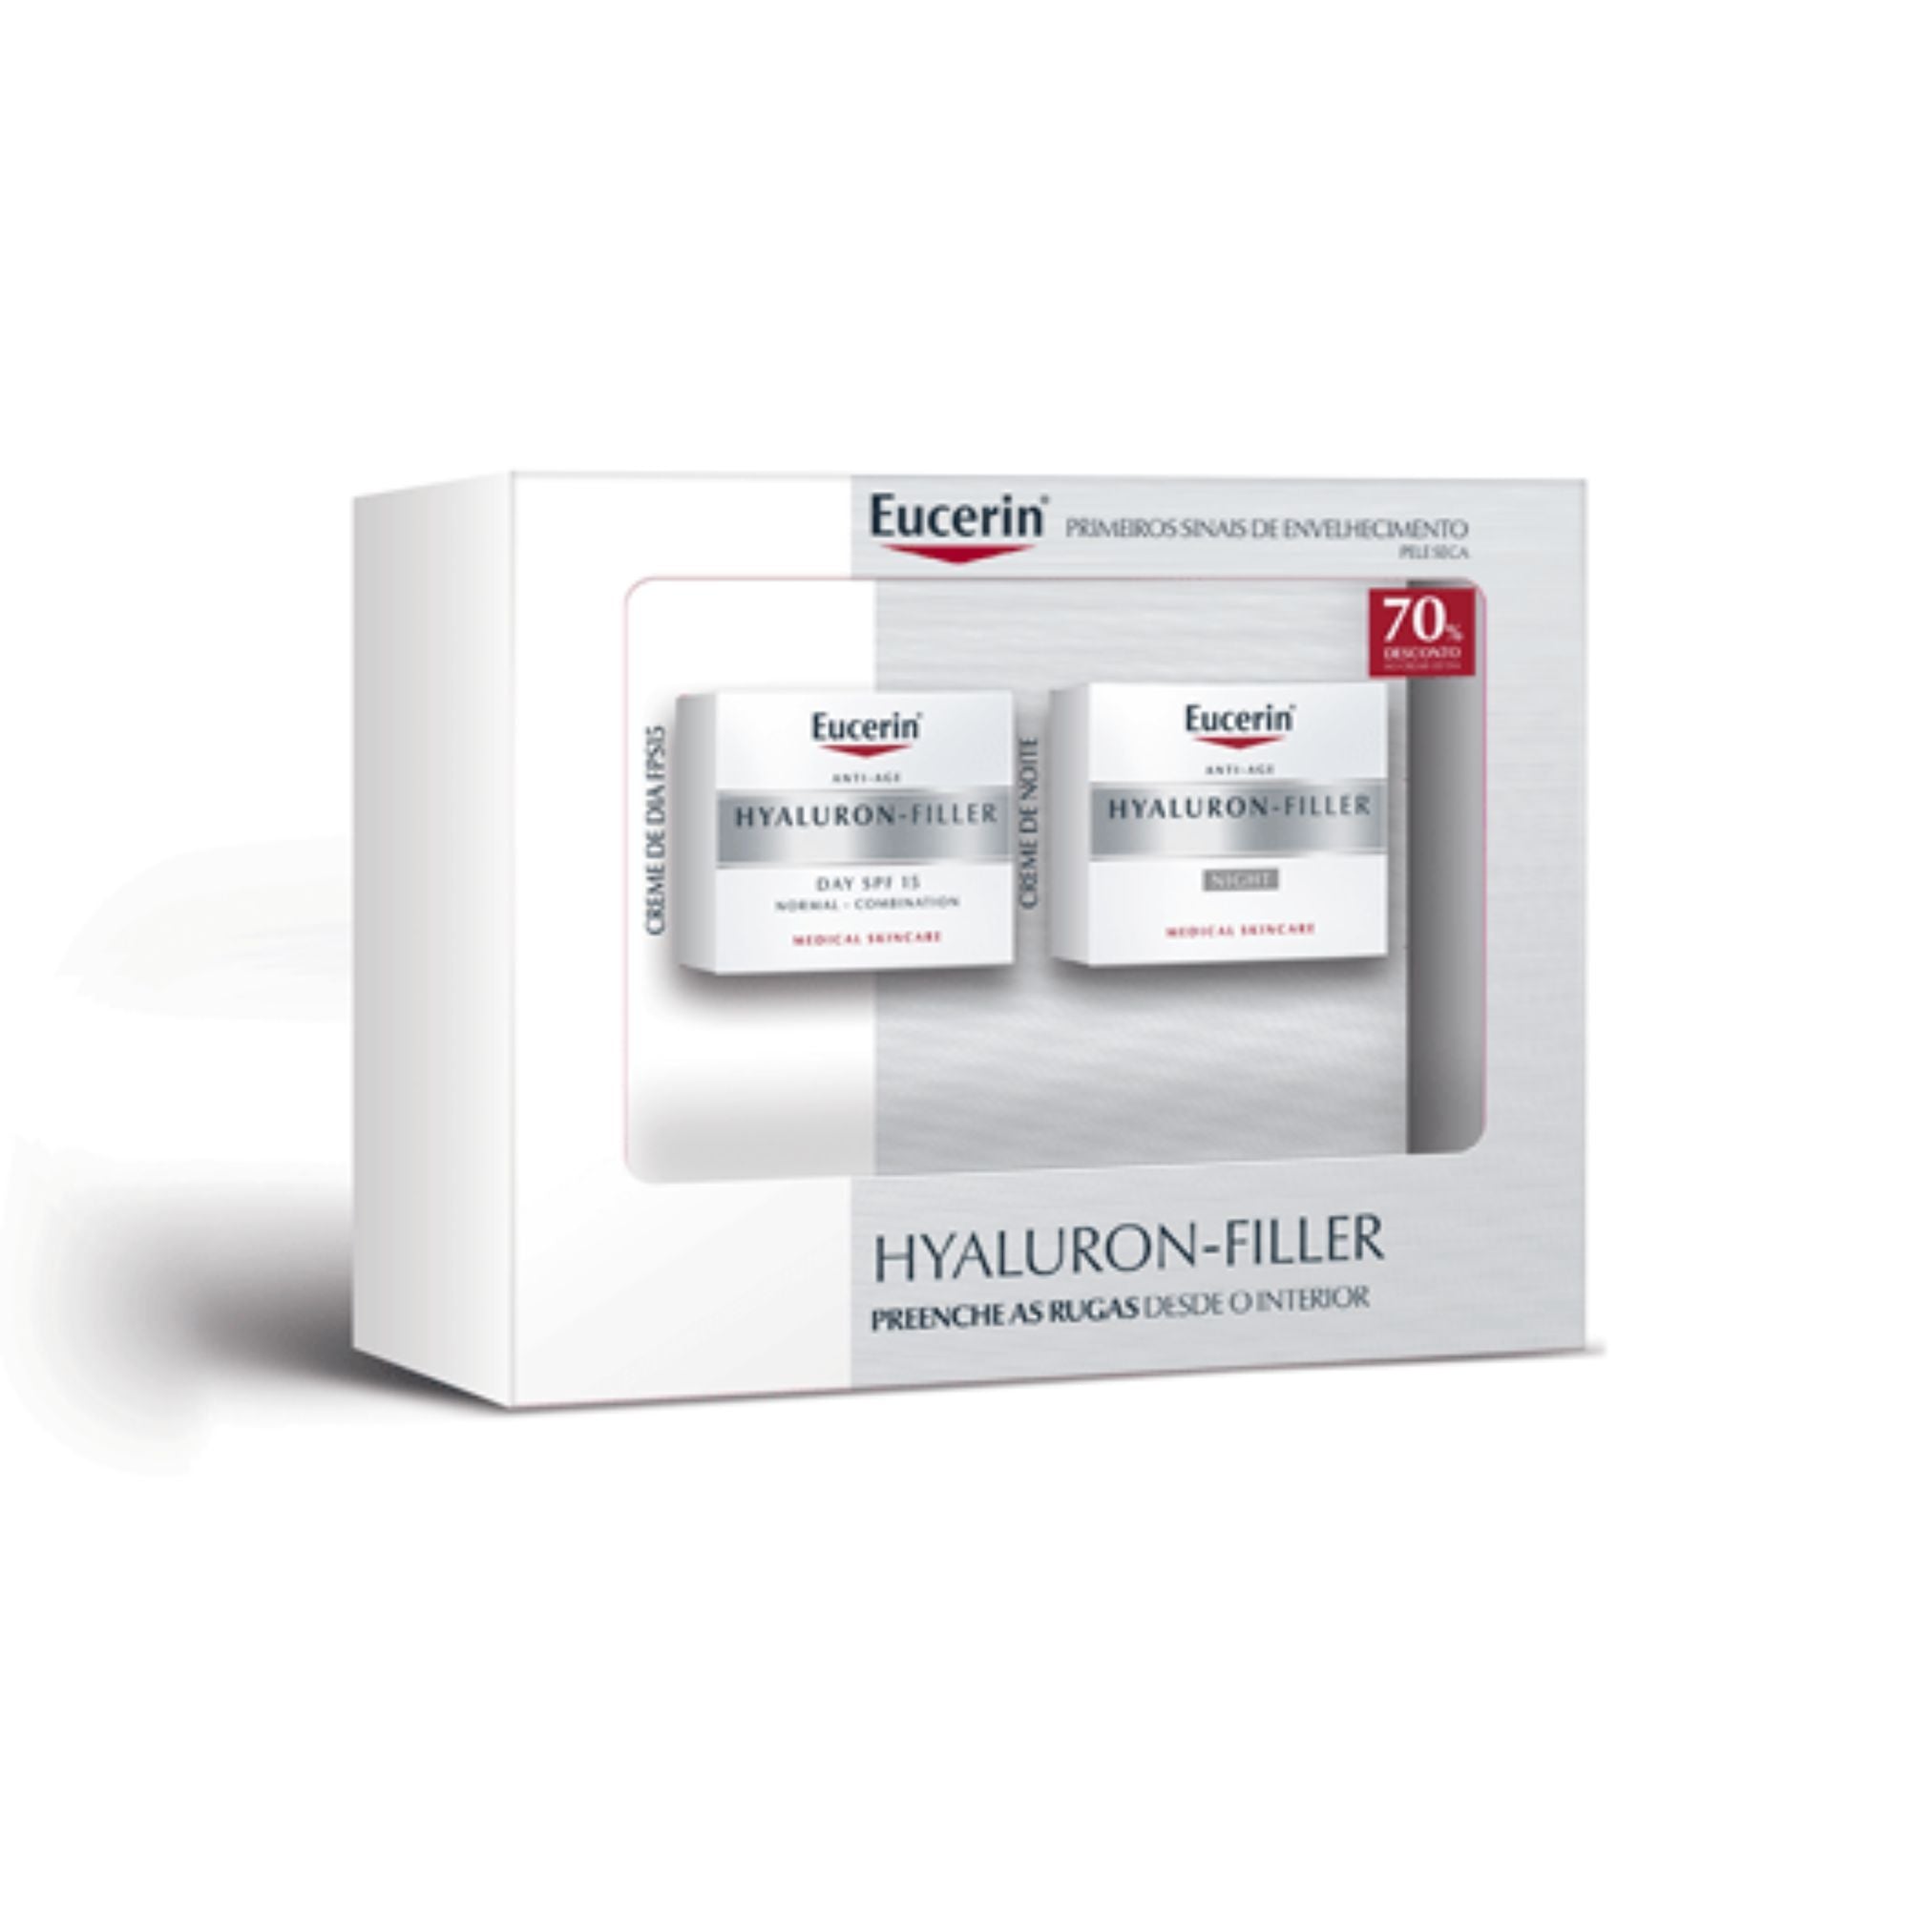 Eucerin Promo Pack: Eucerin Hyaluron-Filler Day Cream SPF15 50ml + Eucerin Hyaluron-Filler Night Cream 50ml for Normal to Combination Skin